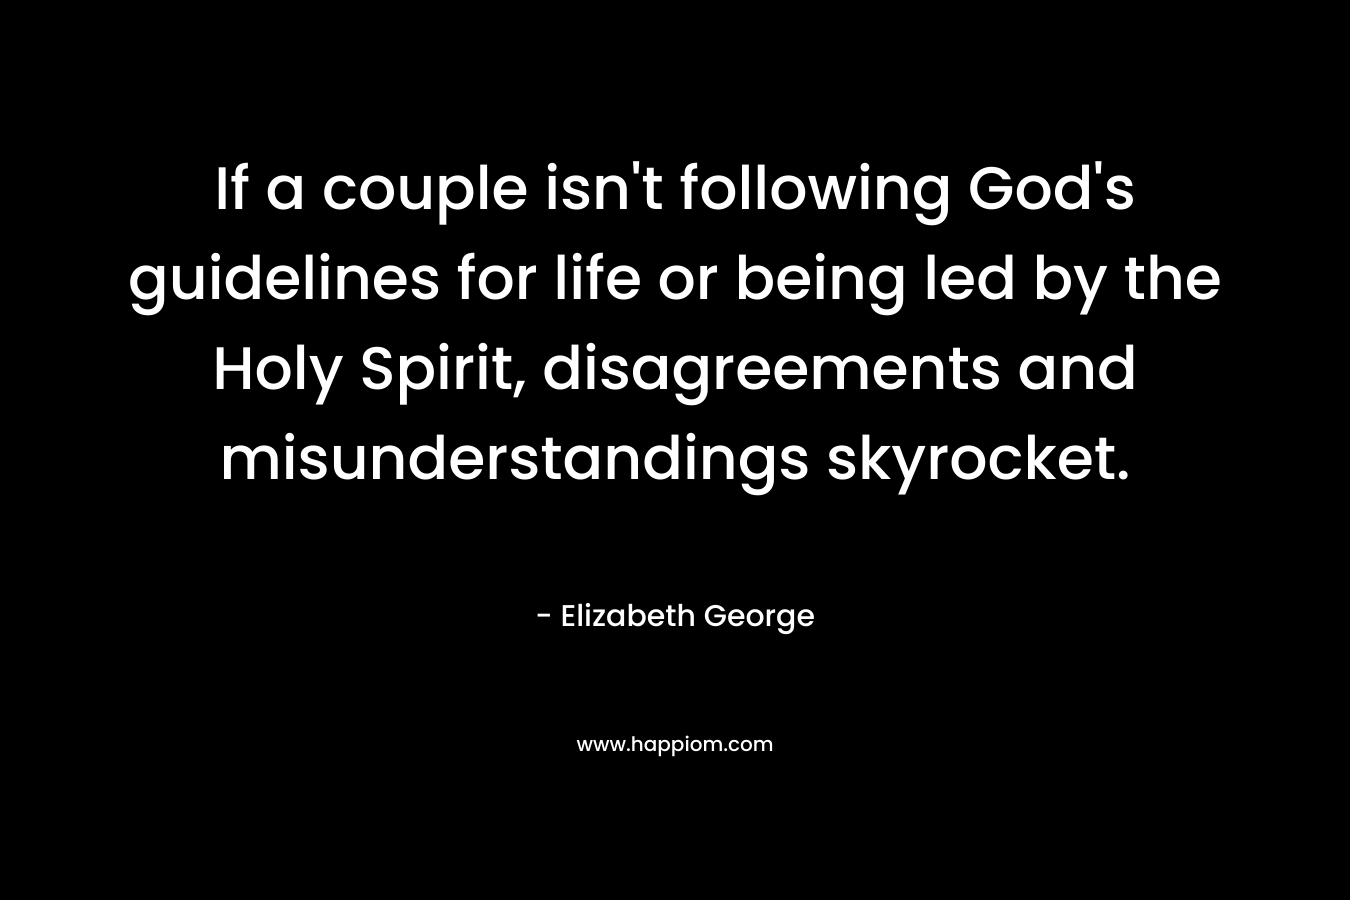 If a couple isn't following God's guidelines for life or being led by the Holy Spirit, disagreements and misunderstandings skyrocket.